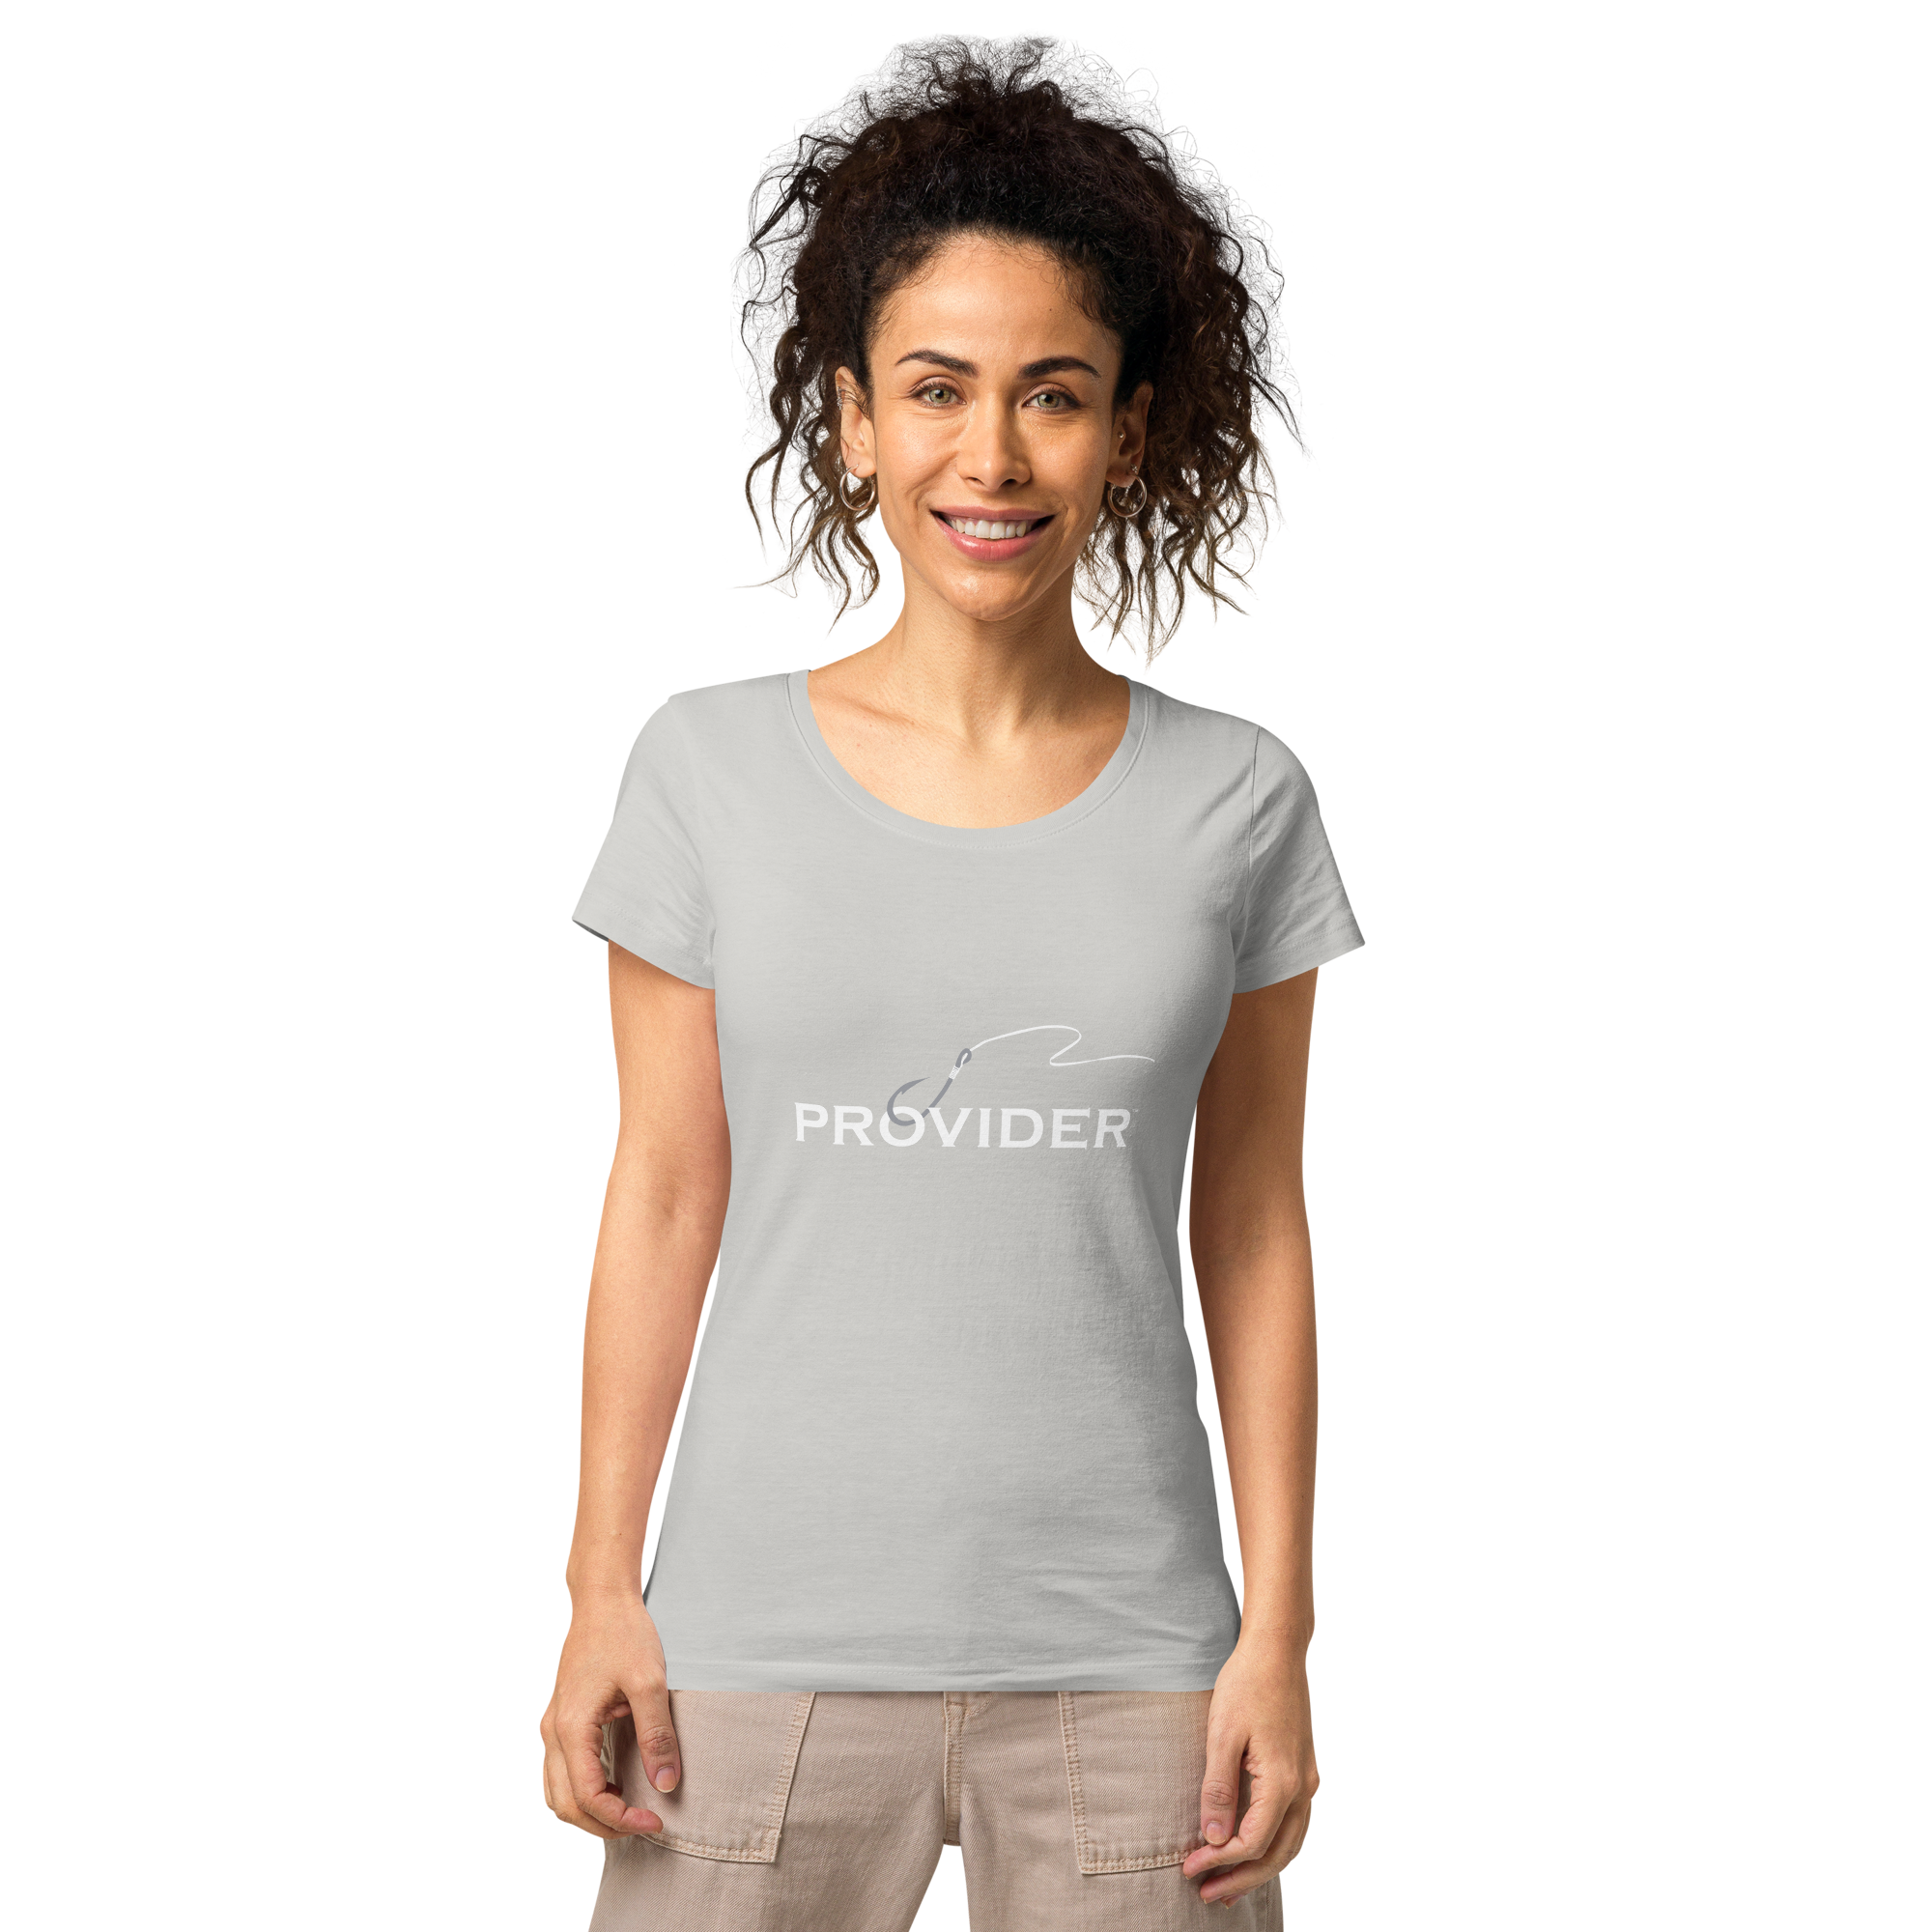 Women's Scoop Neck Tees, Organic, Soft, and Sustainable